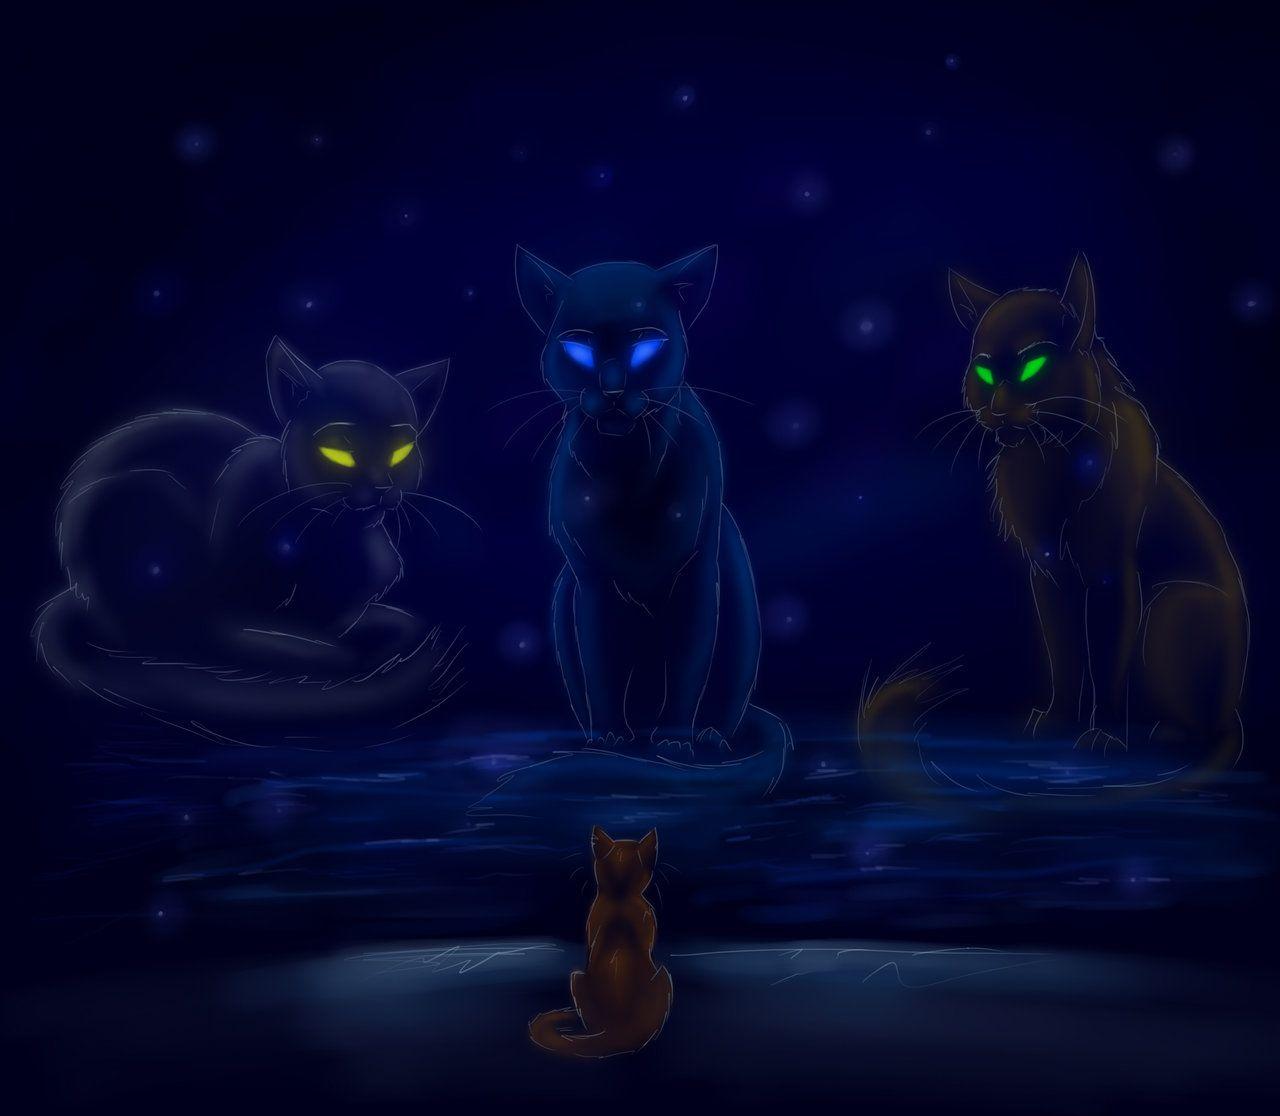 Which Warrior Cat are you most like?